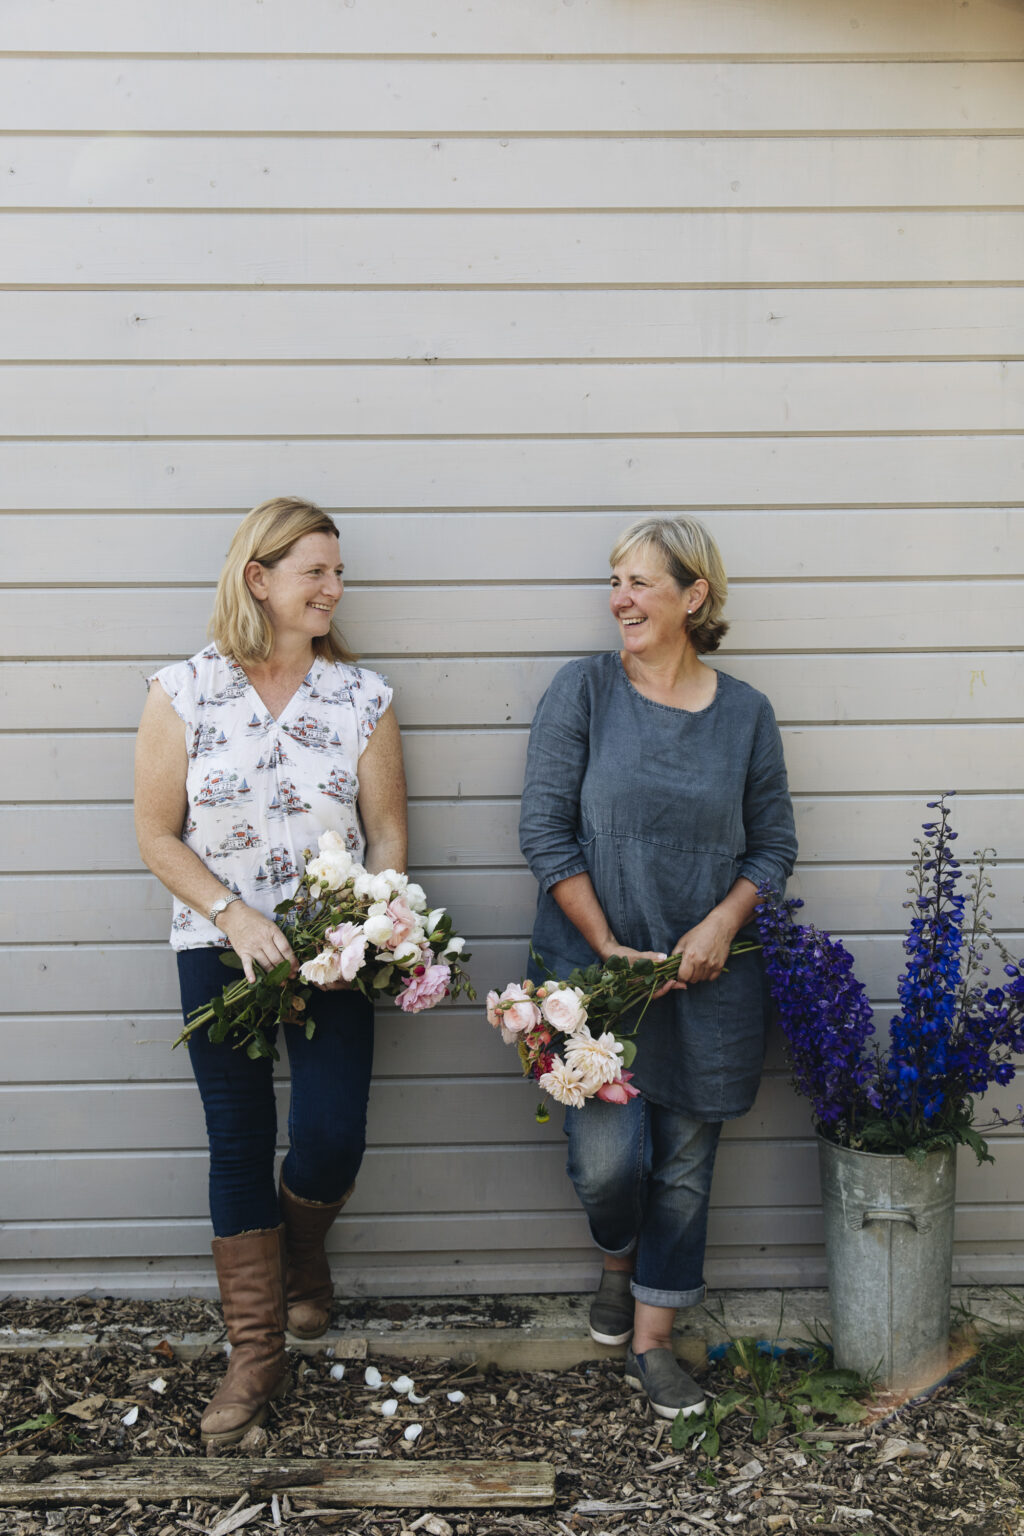 Organic Blooms Jo and Wendy relax against a painted clapboard wall.